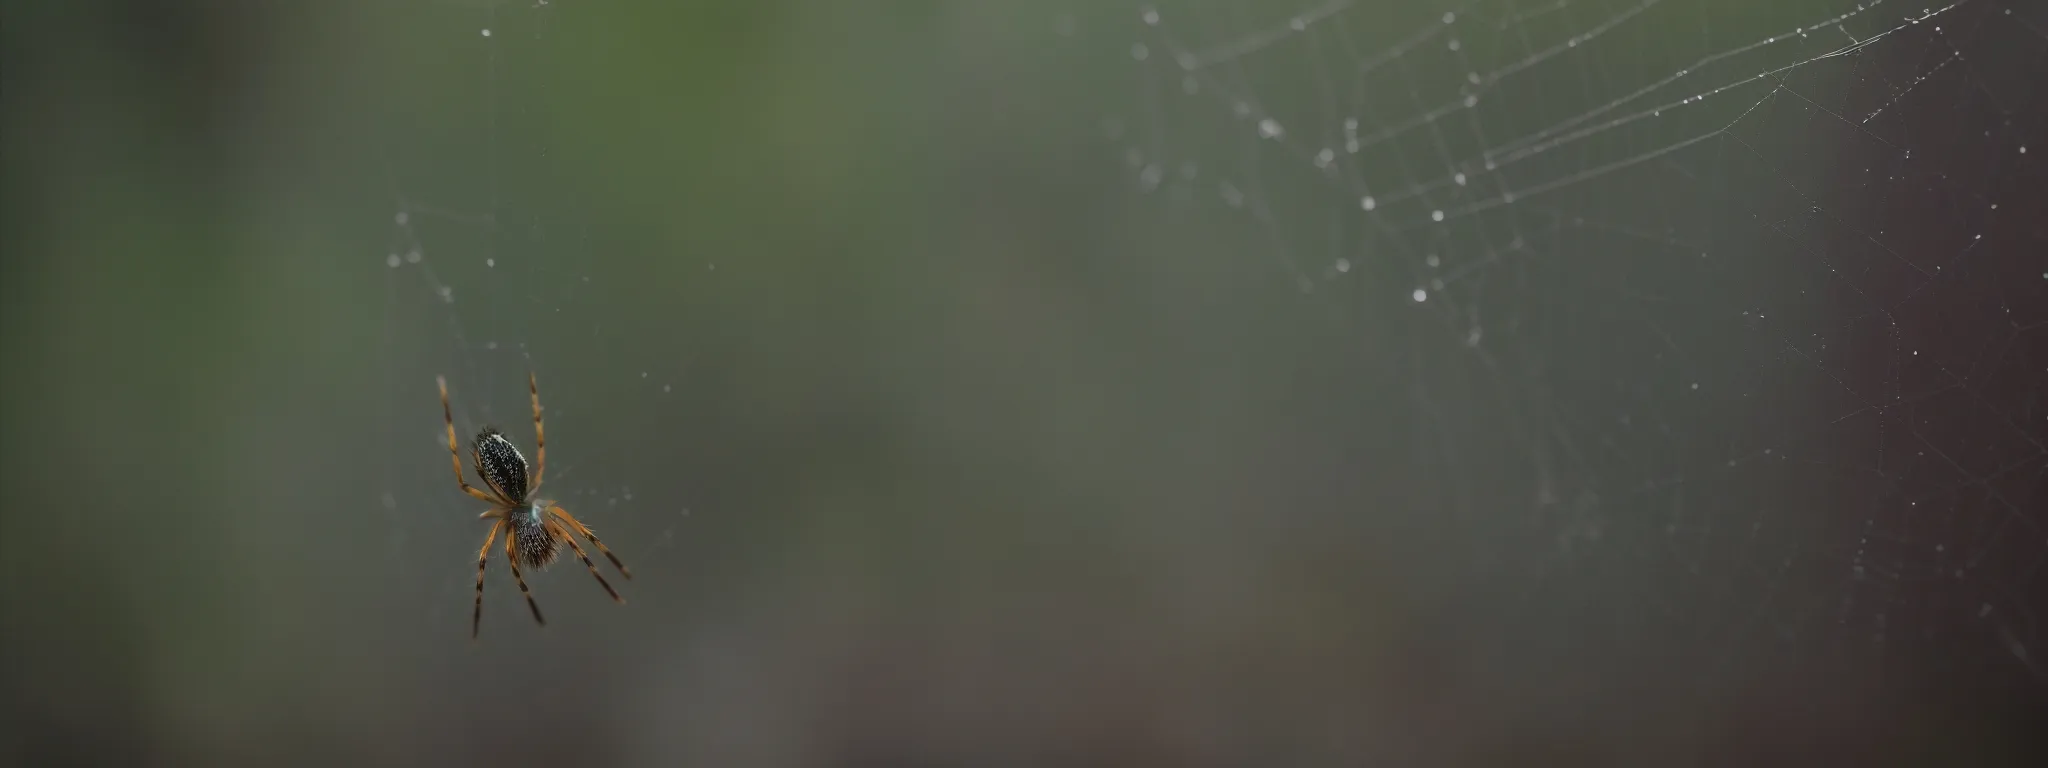 a spider delicately navigating its web without getting caught.